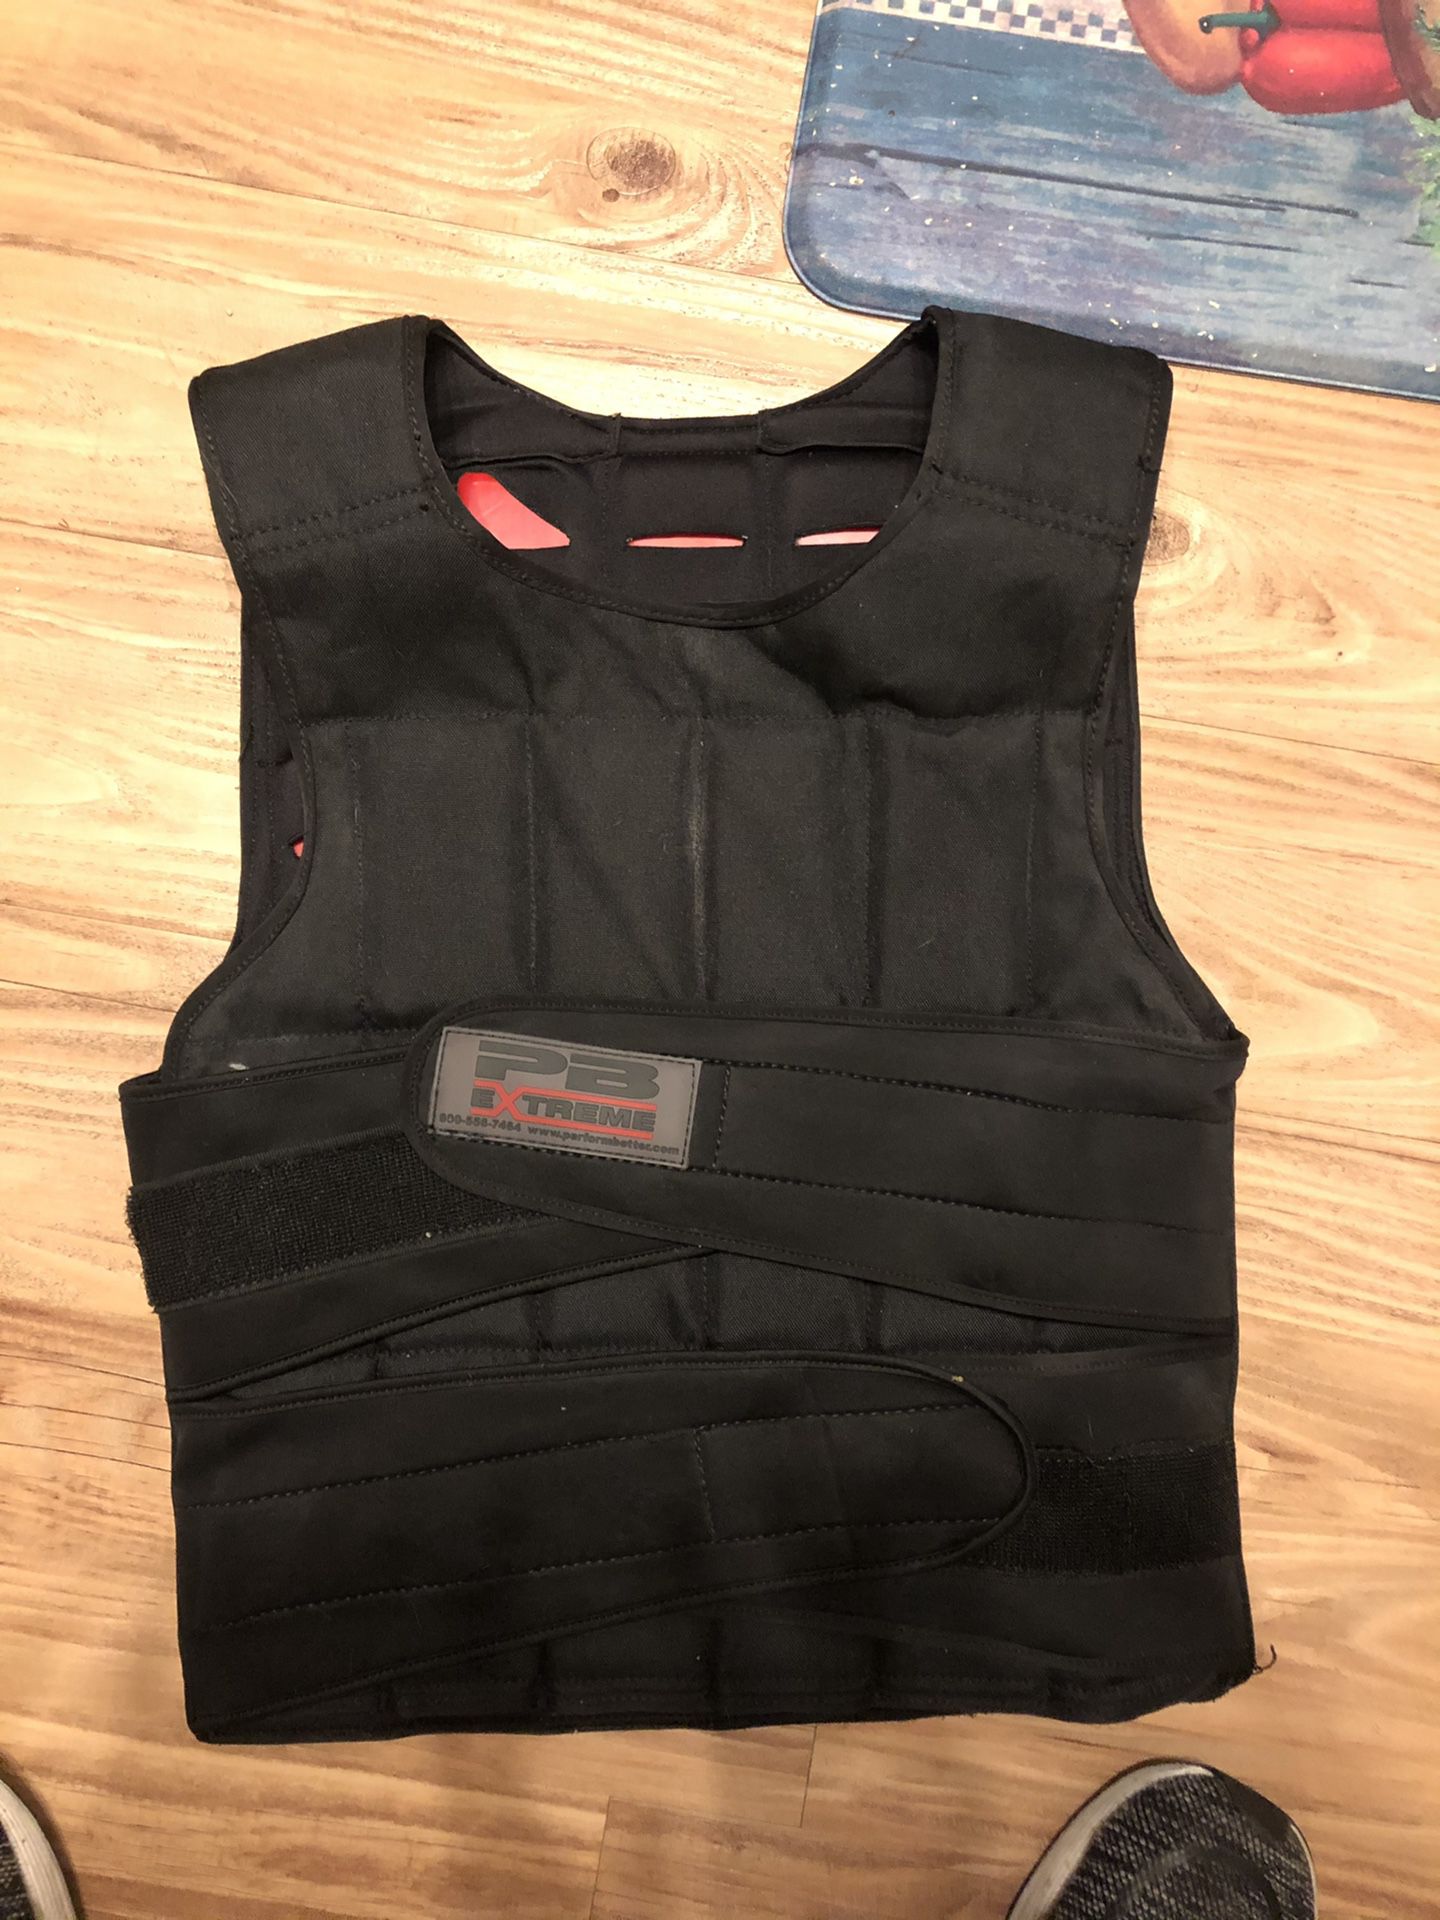 PB extreme weighted vest